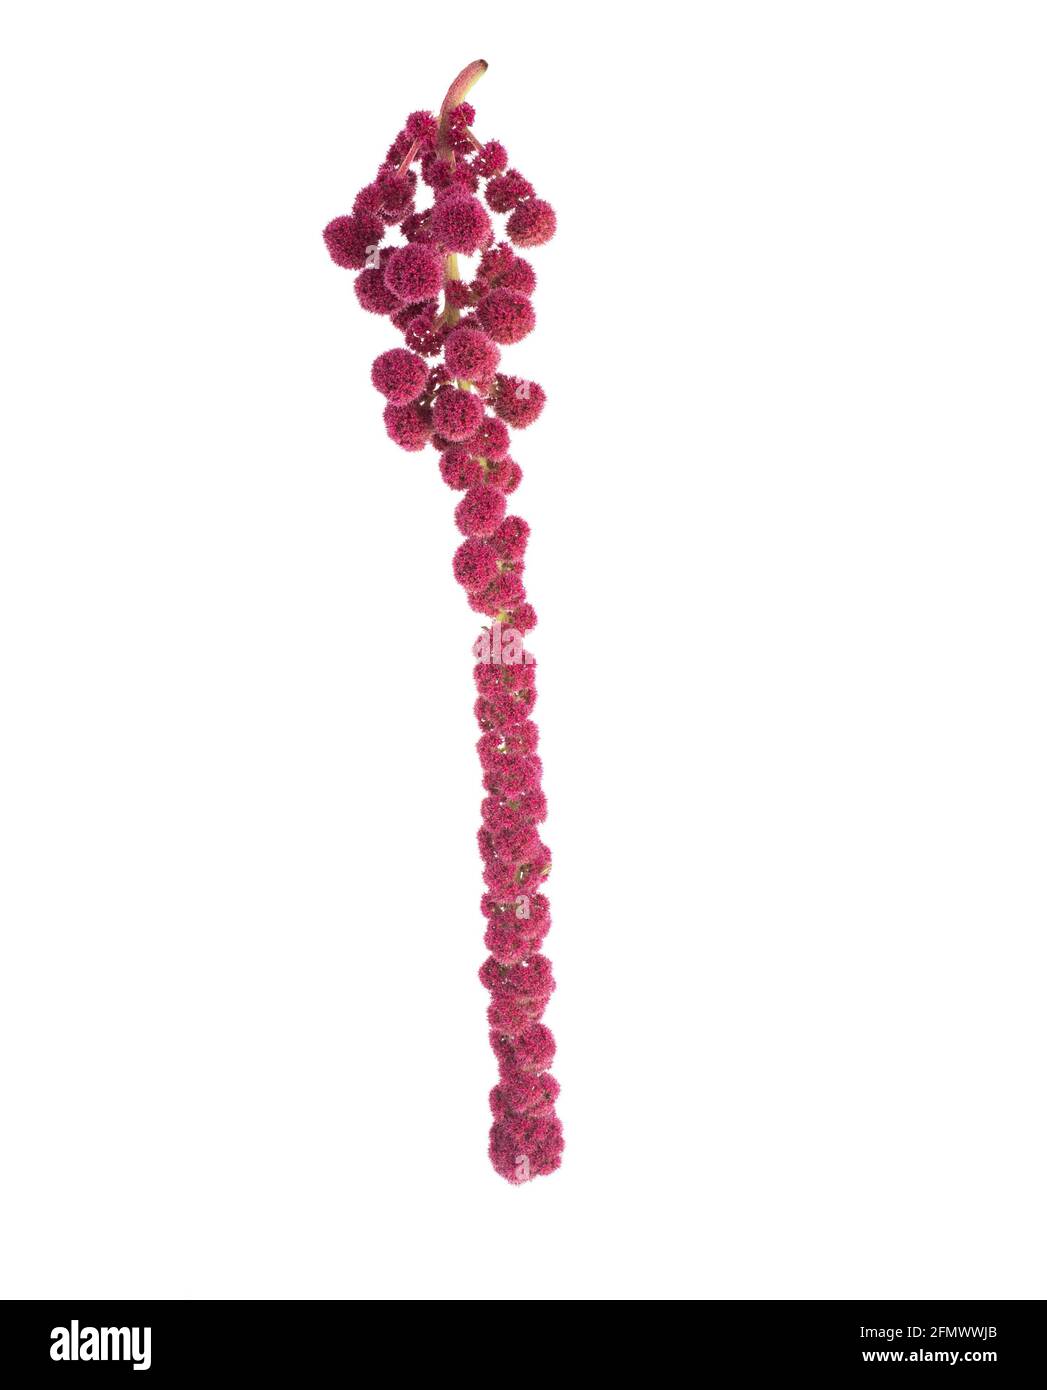 Burgundy braid of amaranth color on a white background, isolate, close-up. Stock Photo